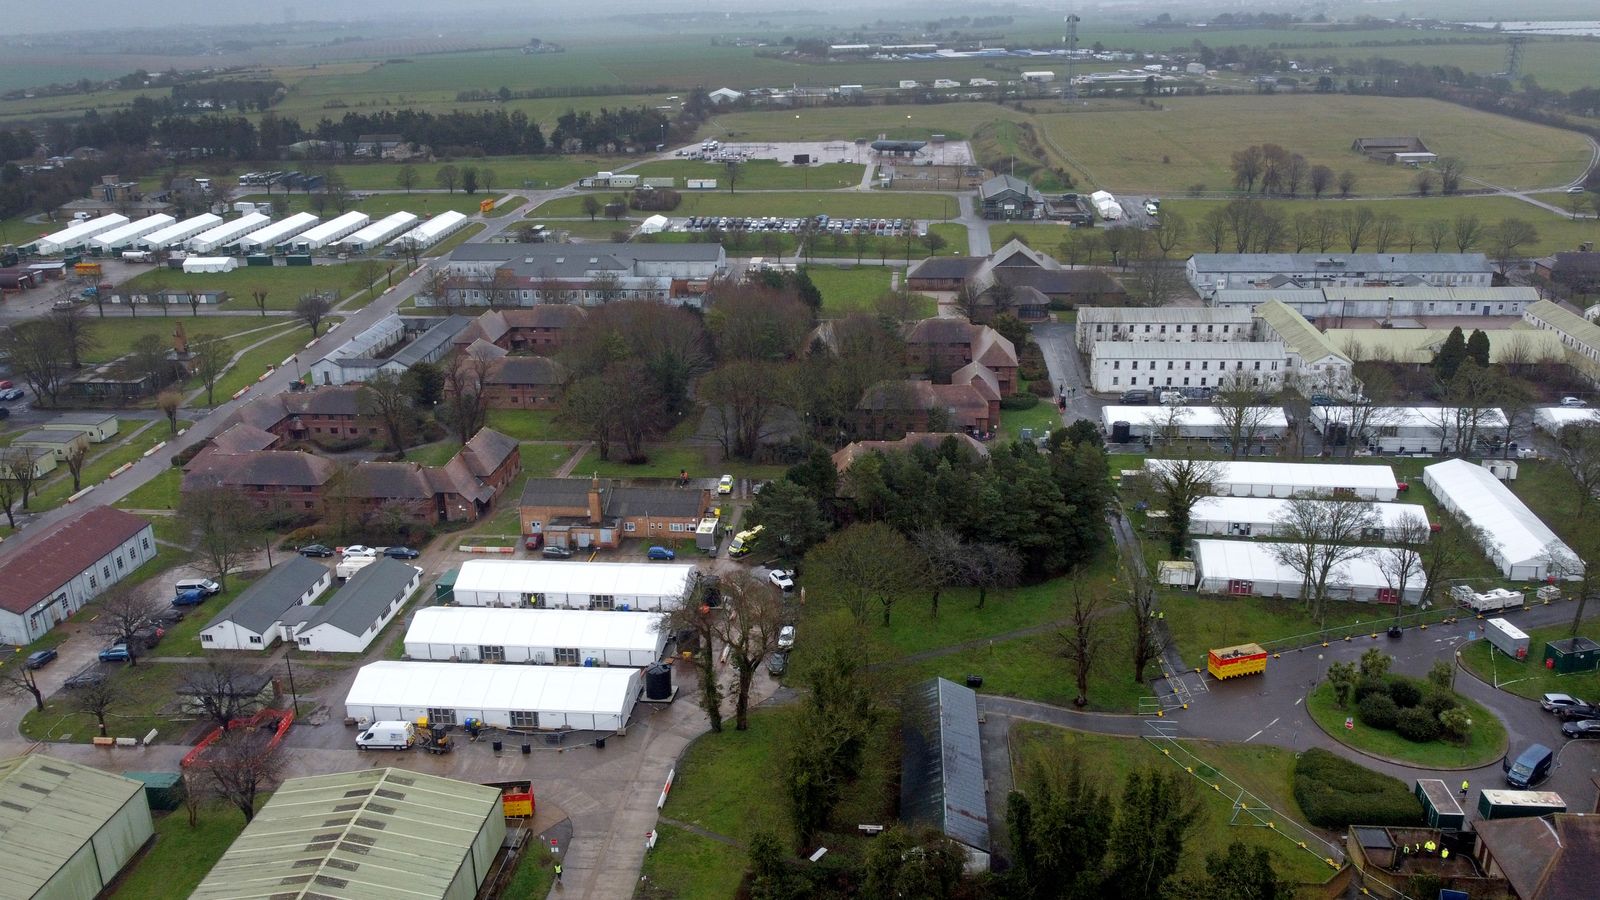 Plans to house 2,000 Channel migrants in tents branded 'cruel' by refugee charity